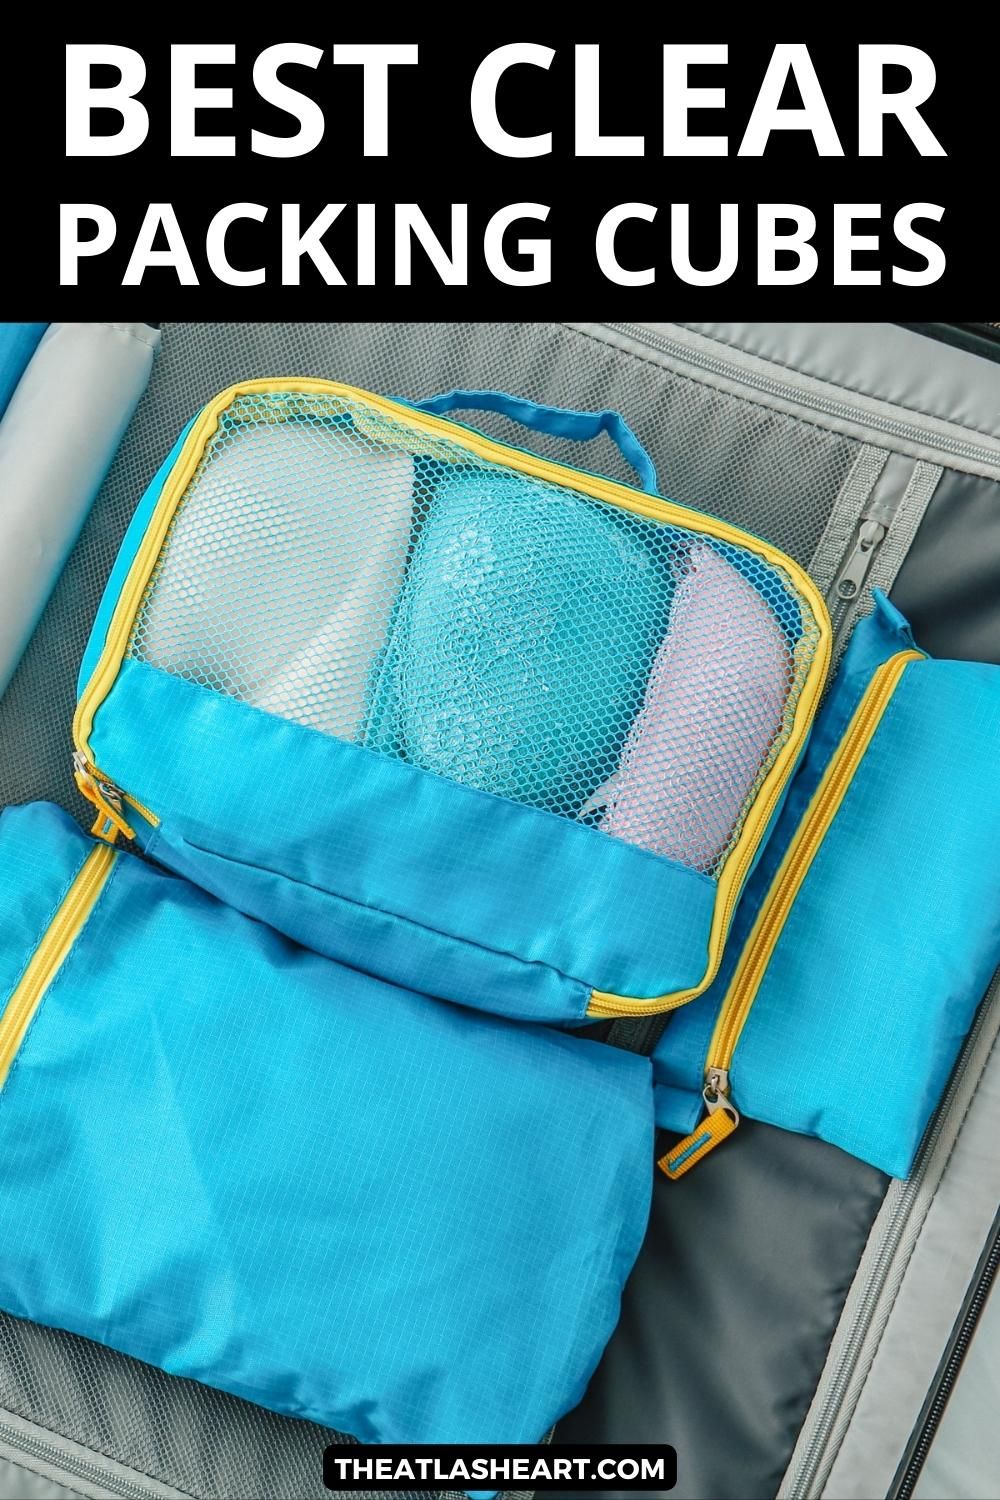 A close-up view of a set of three blue packing cubes with a mesh window, nestled inside of an open suitcase, with the text overlay, "Best Clear Packing Cubes."